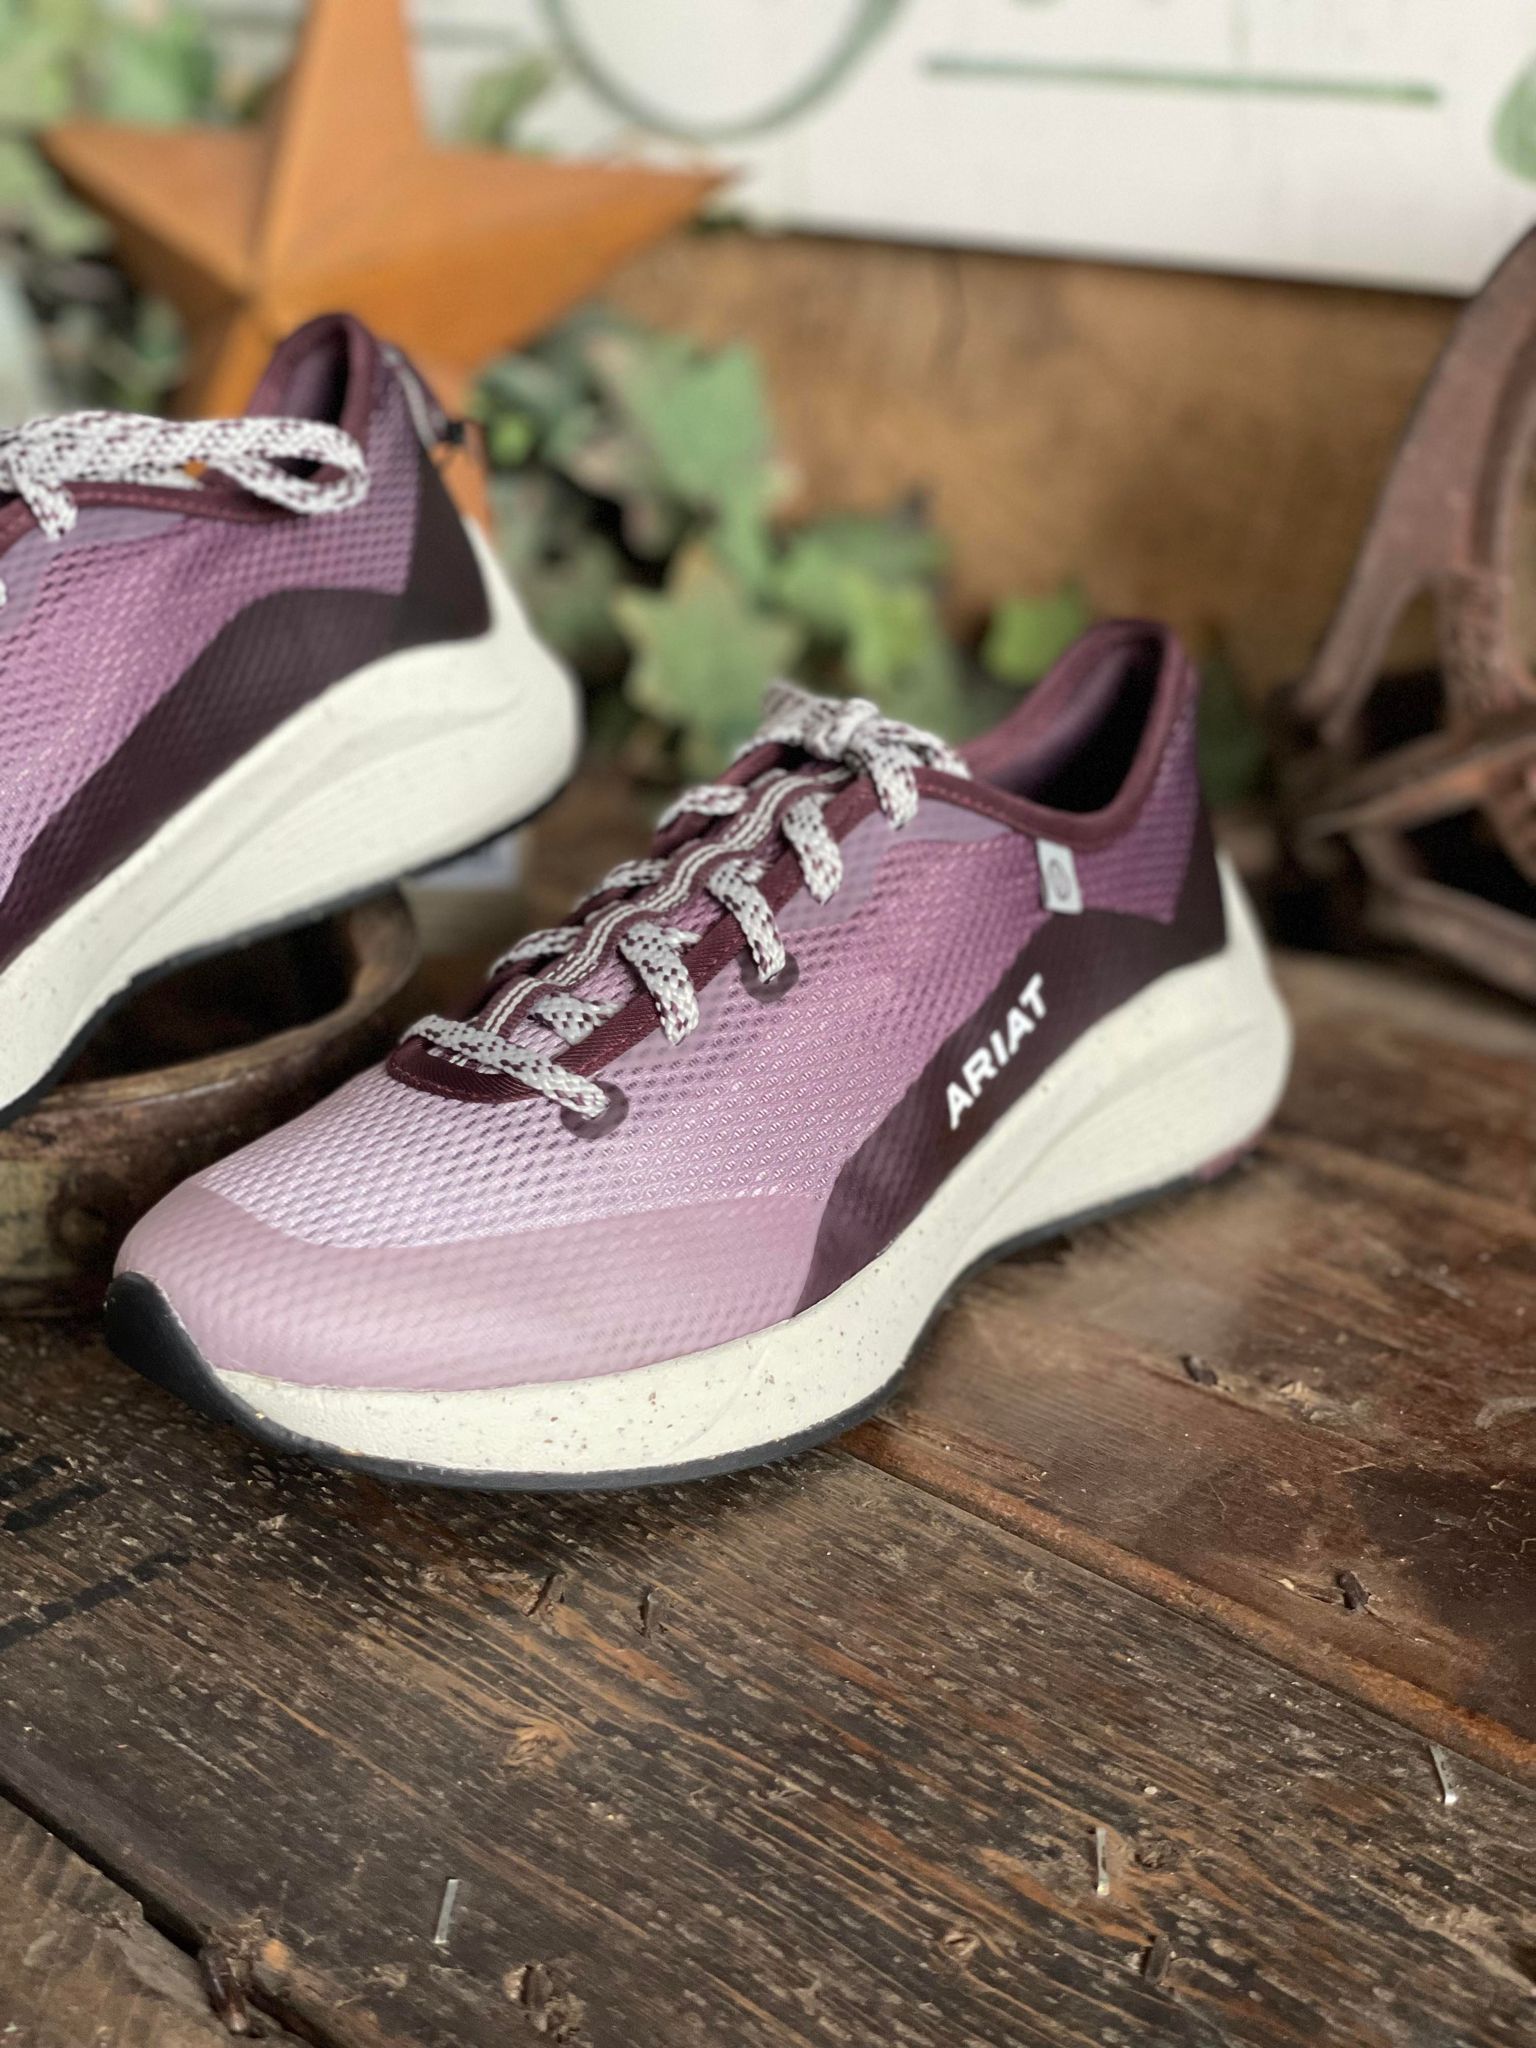 Women's Ariat Swiftrunner Sneaker in Winetasting *FINAL SALE*-Women's Casual Shoes-Ariat-Lucky J Boots & More, Women's, Men's, & Kids Western Store Located in Carthage, MO